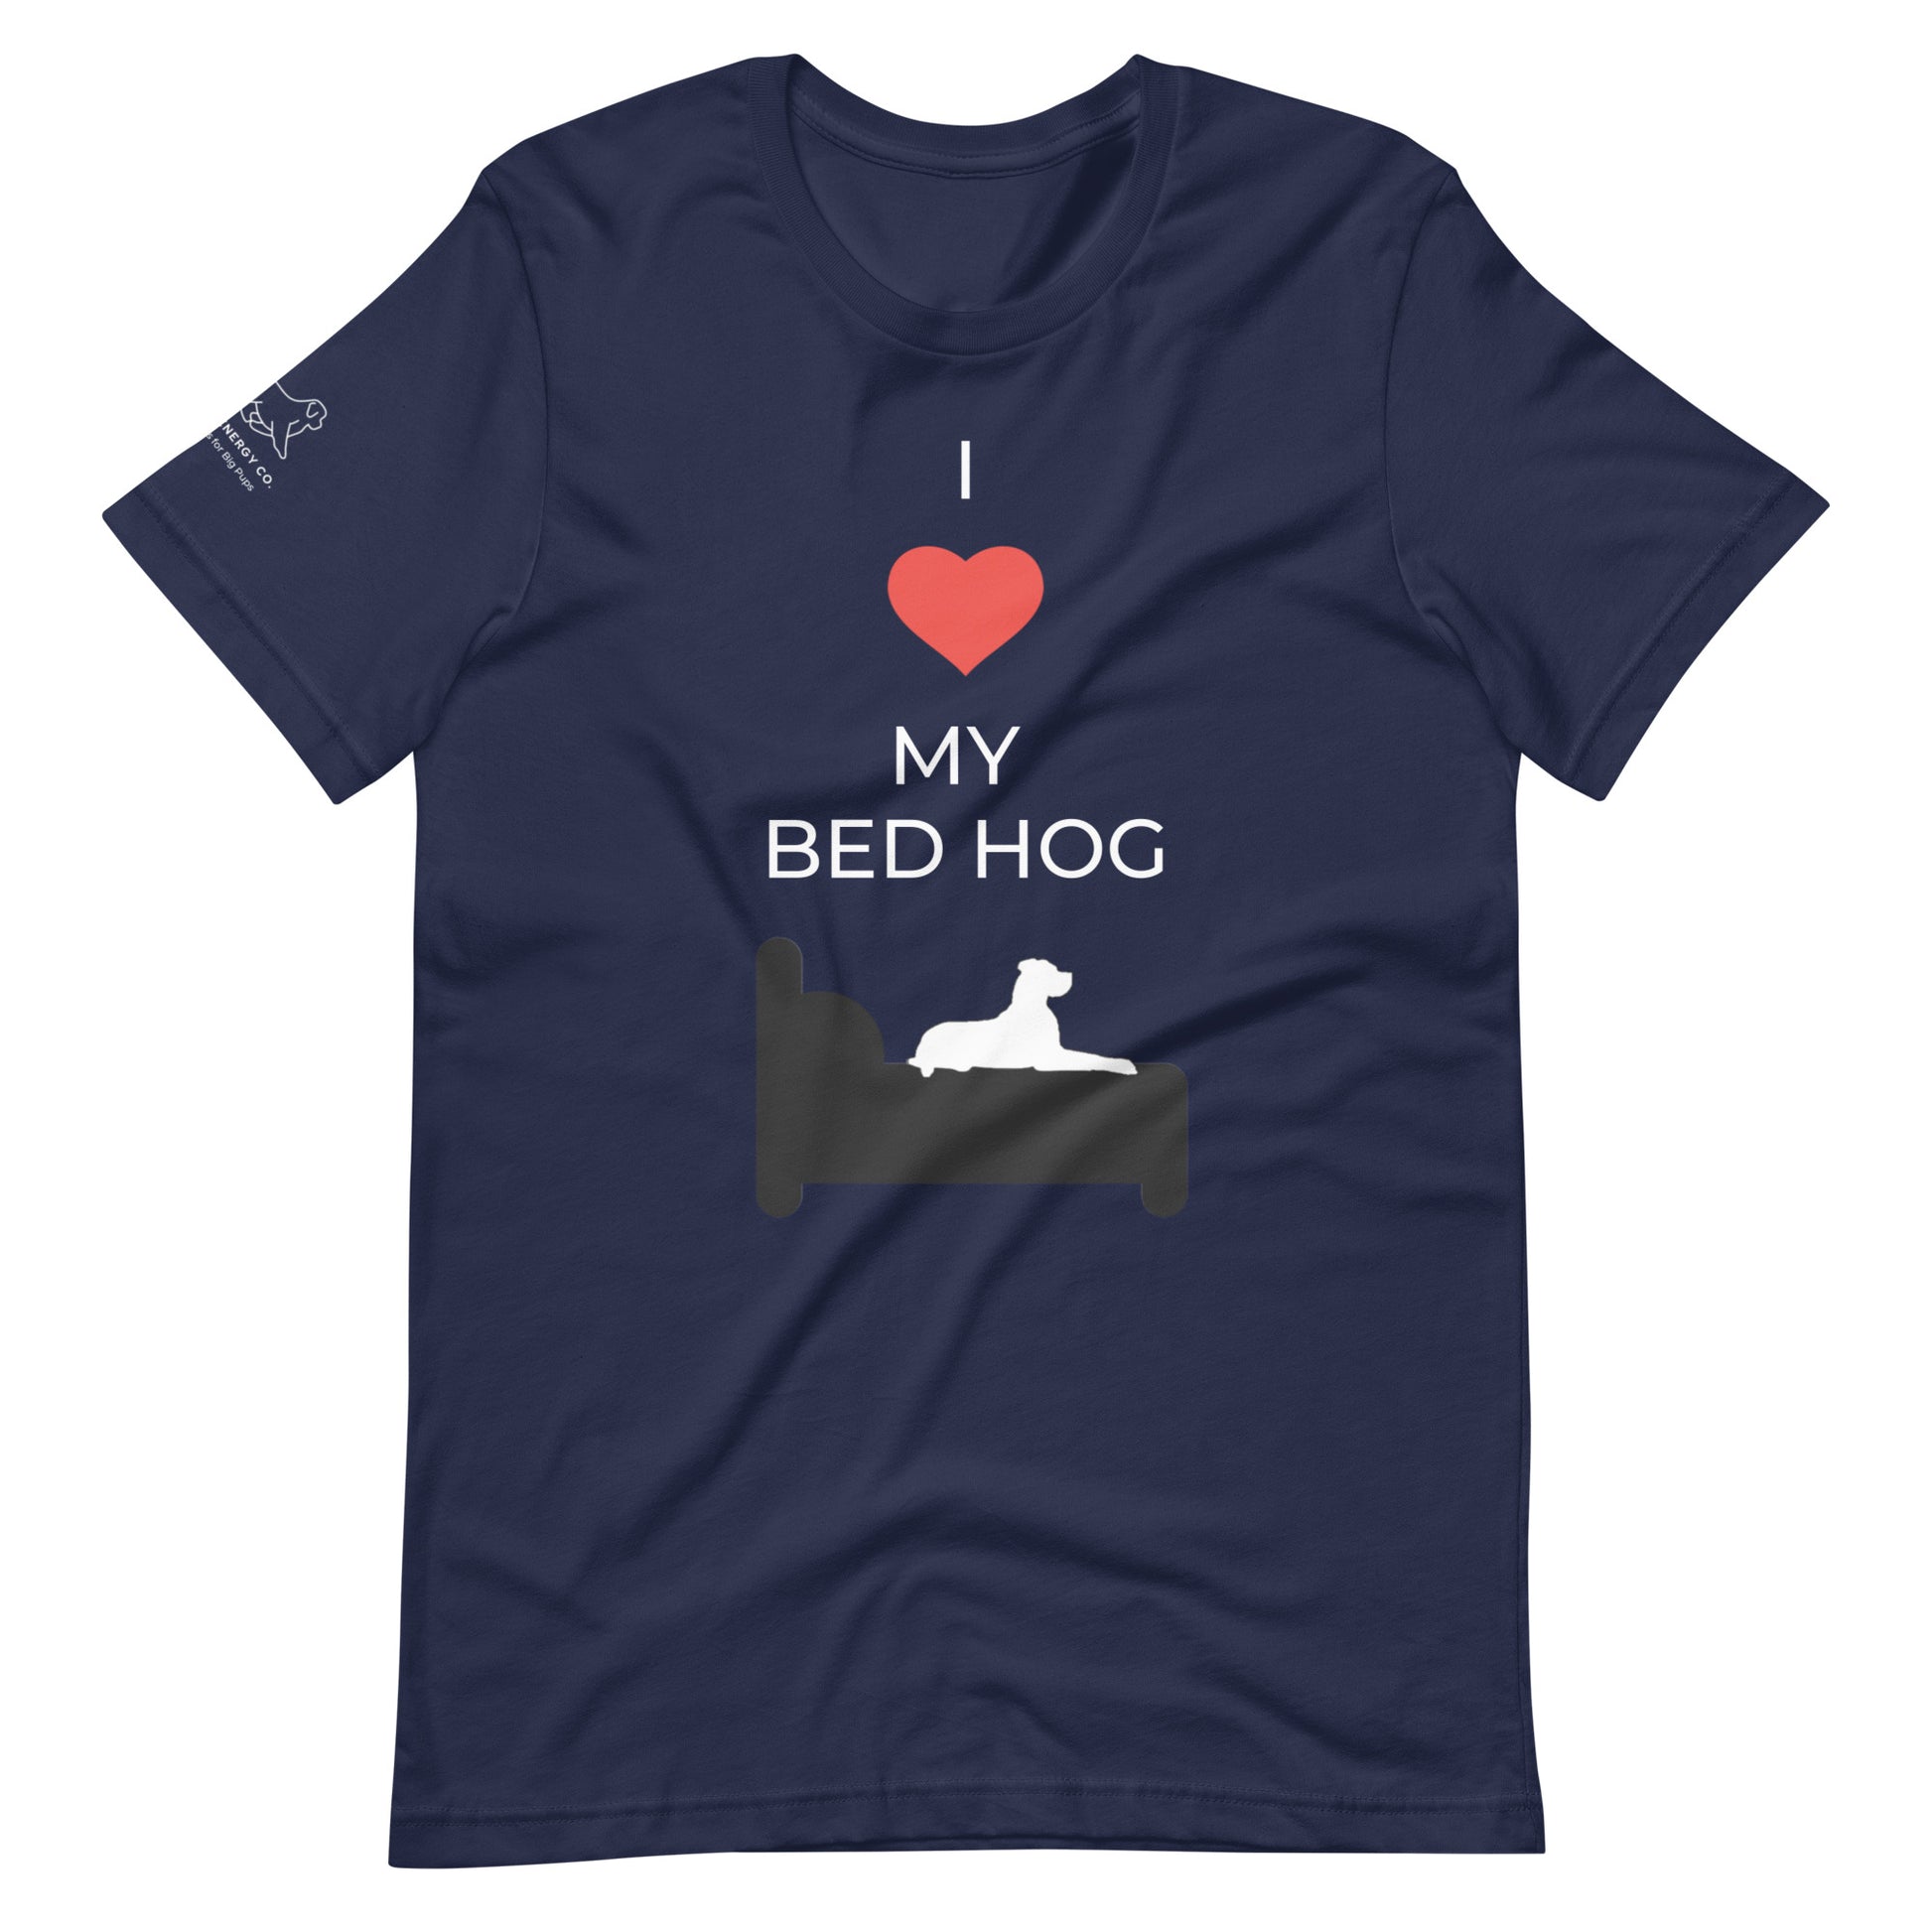 Front of a navy blue t-shirt that reads "I love my bed hog" in white text over an illustration that is the white silhouette of a large dog laying on the deep gray silhouette of a bed. The word "love" is replaced by a red heart symbol.